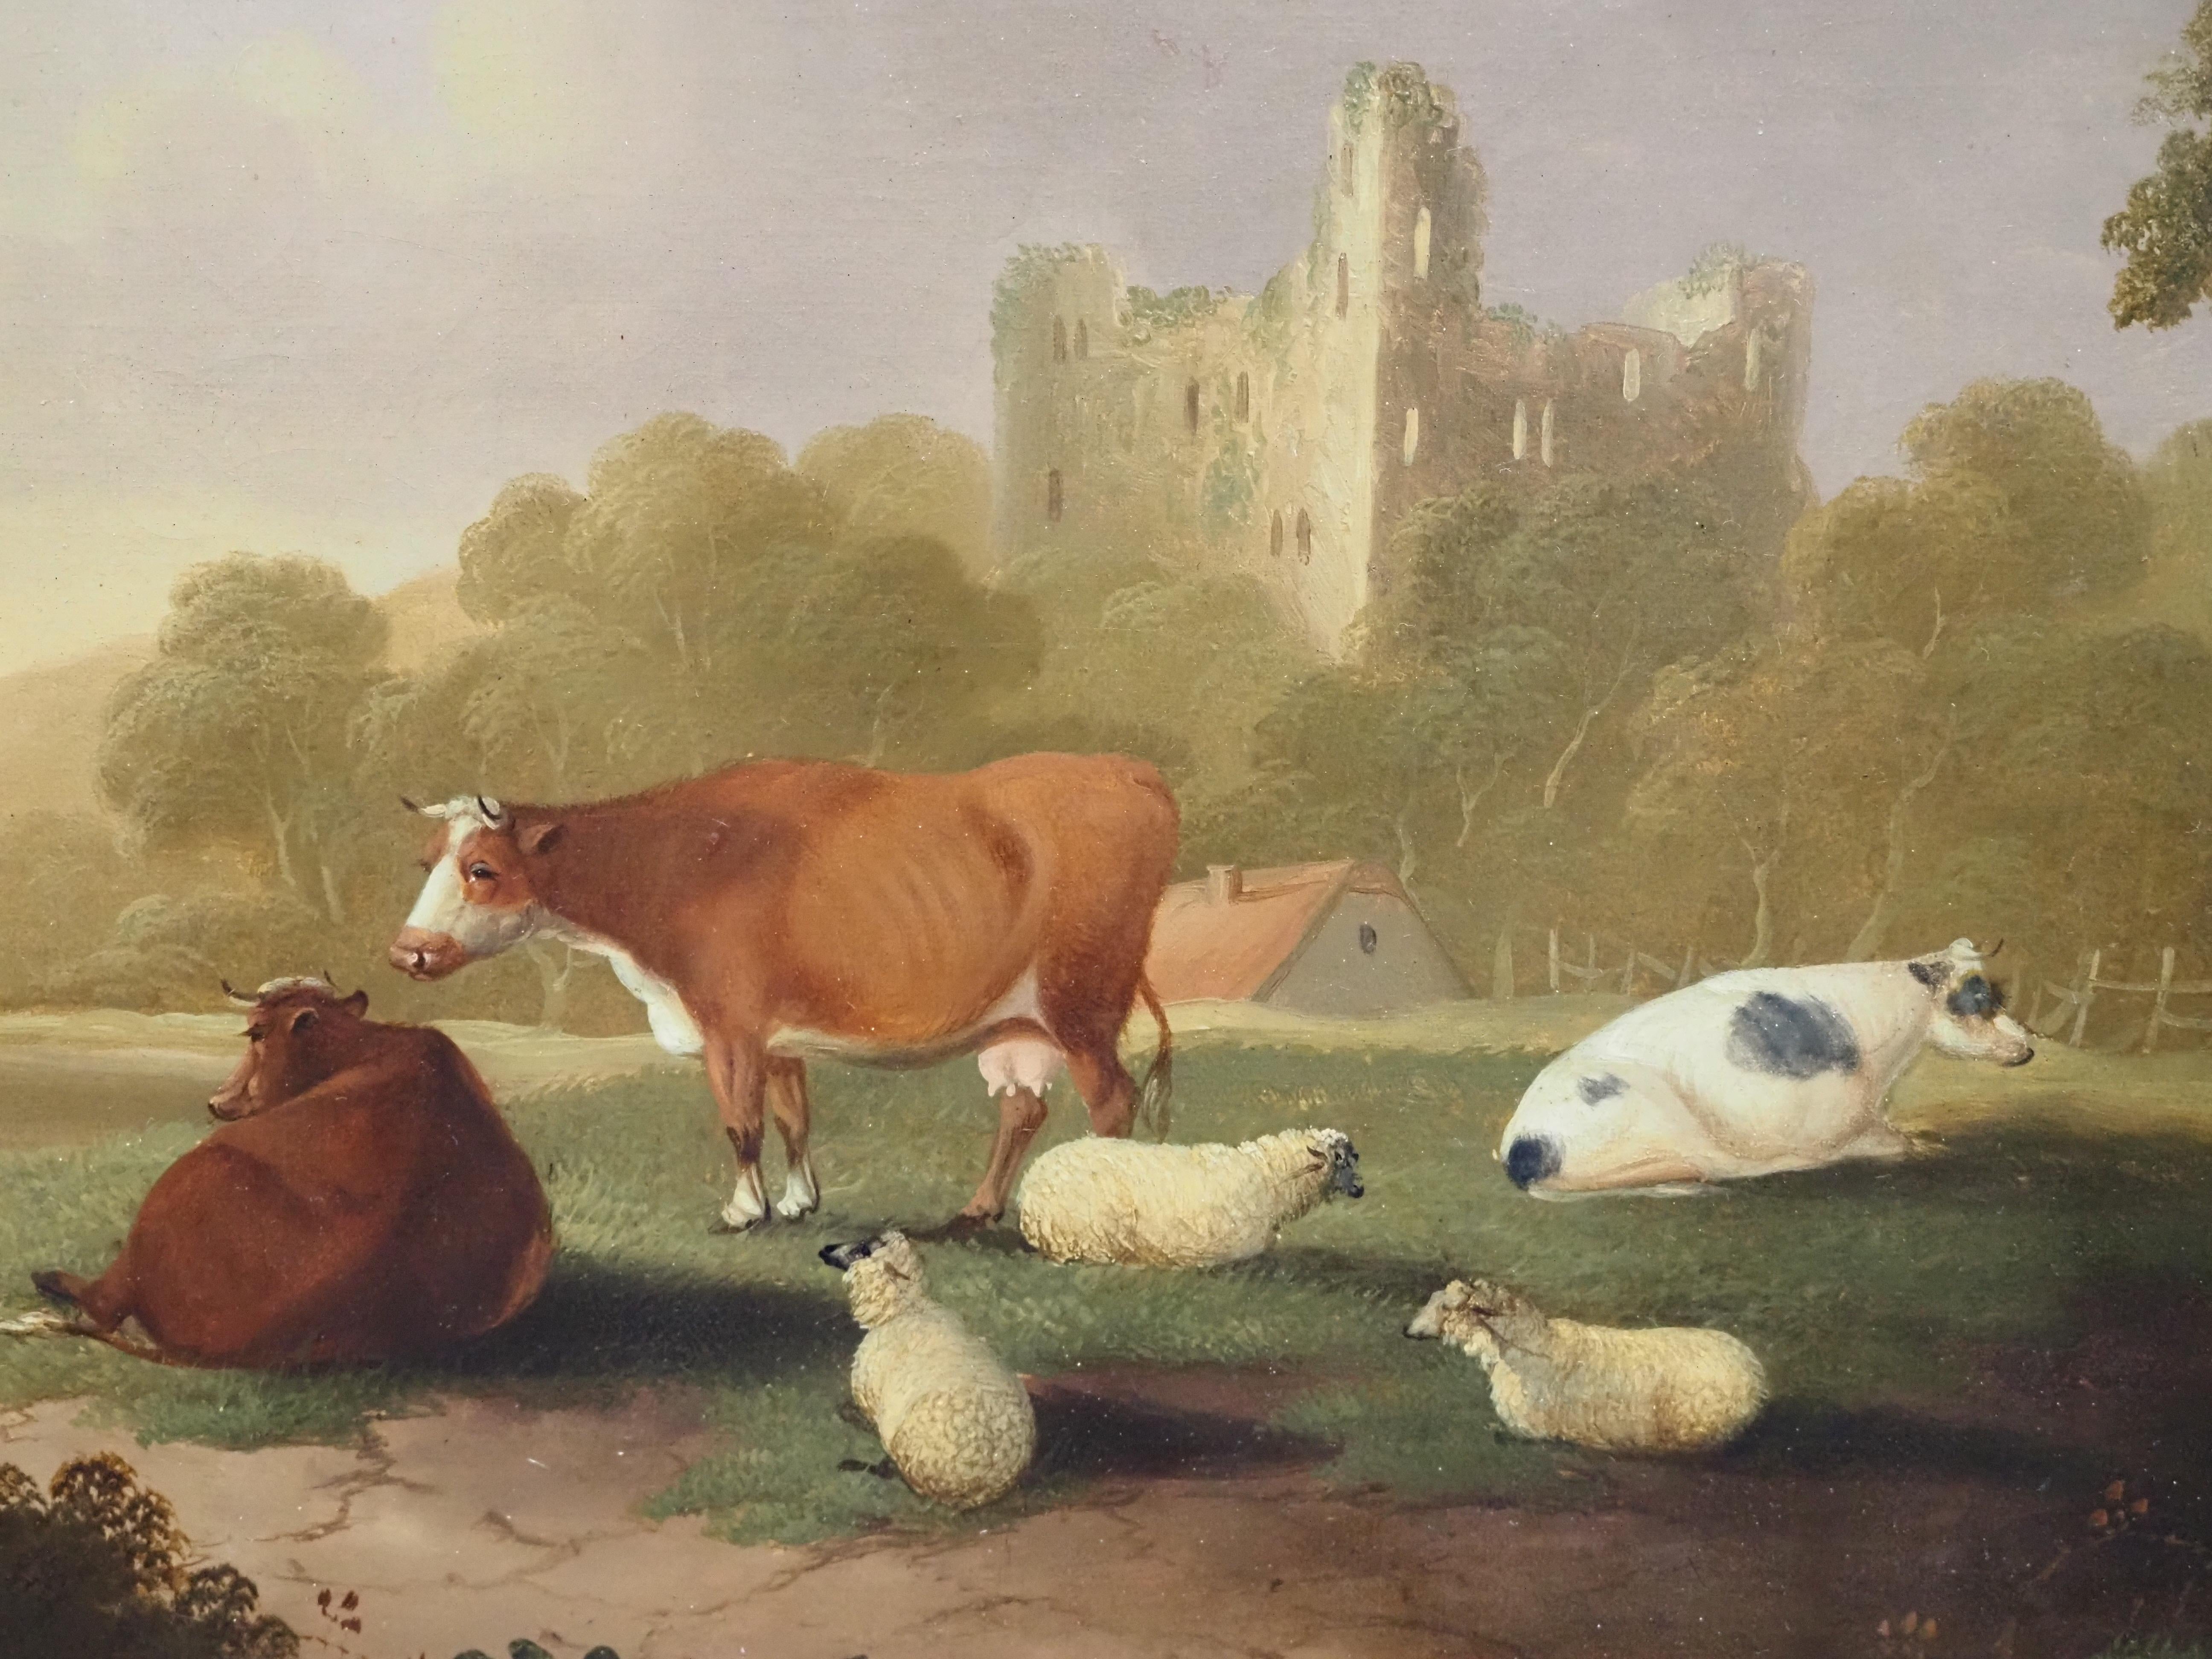 Charles Towne (1763-1840)
Cattle and sheep on the riverbank, a castle beyond
Signed 'C. Towne' lower right
Oil on canvas
26 x 30 in

Provenance
Private Collection, London

Charles Towne is the leading Liverpool landscape, animal and sporting painter